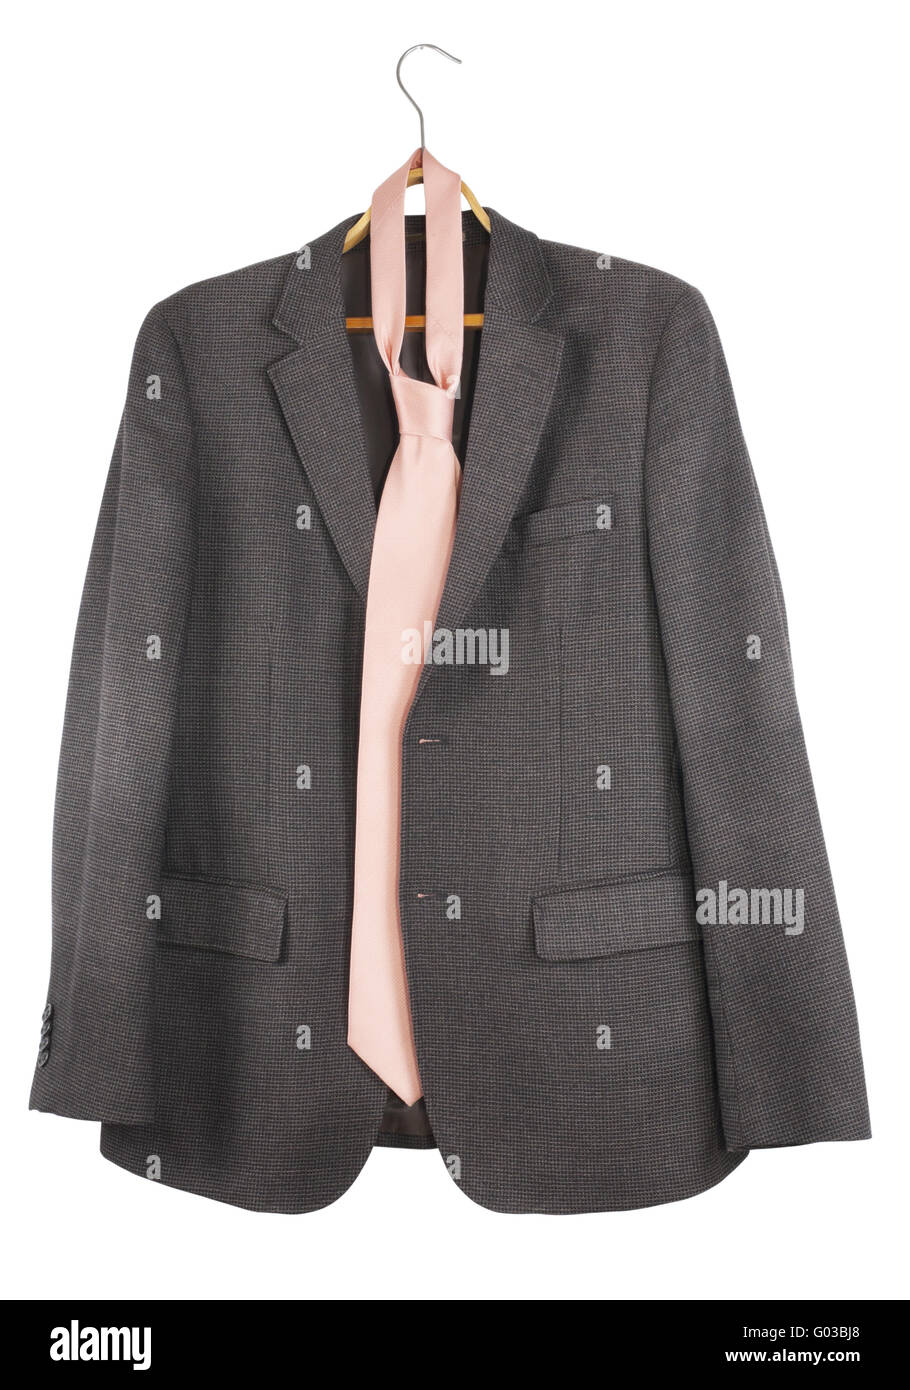 The old shabby tweed jacket and pink tie hang on a hanger Stock Photo